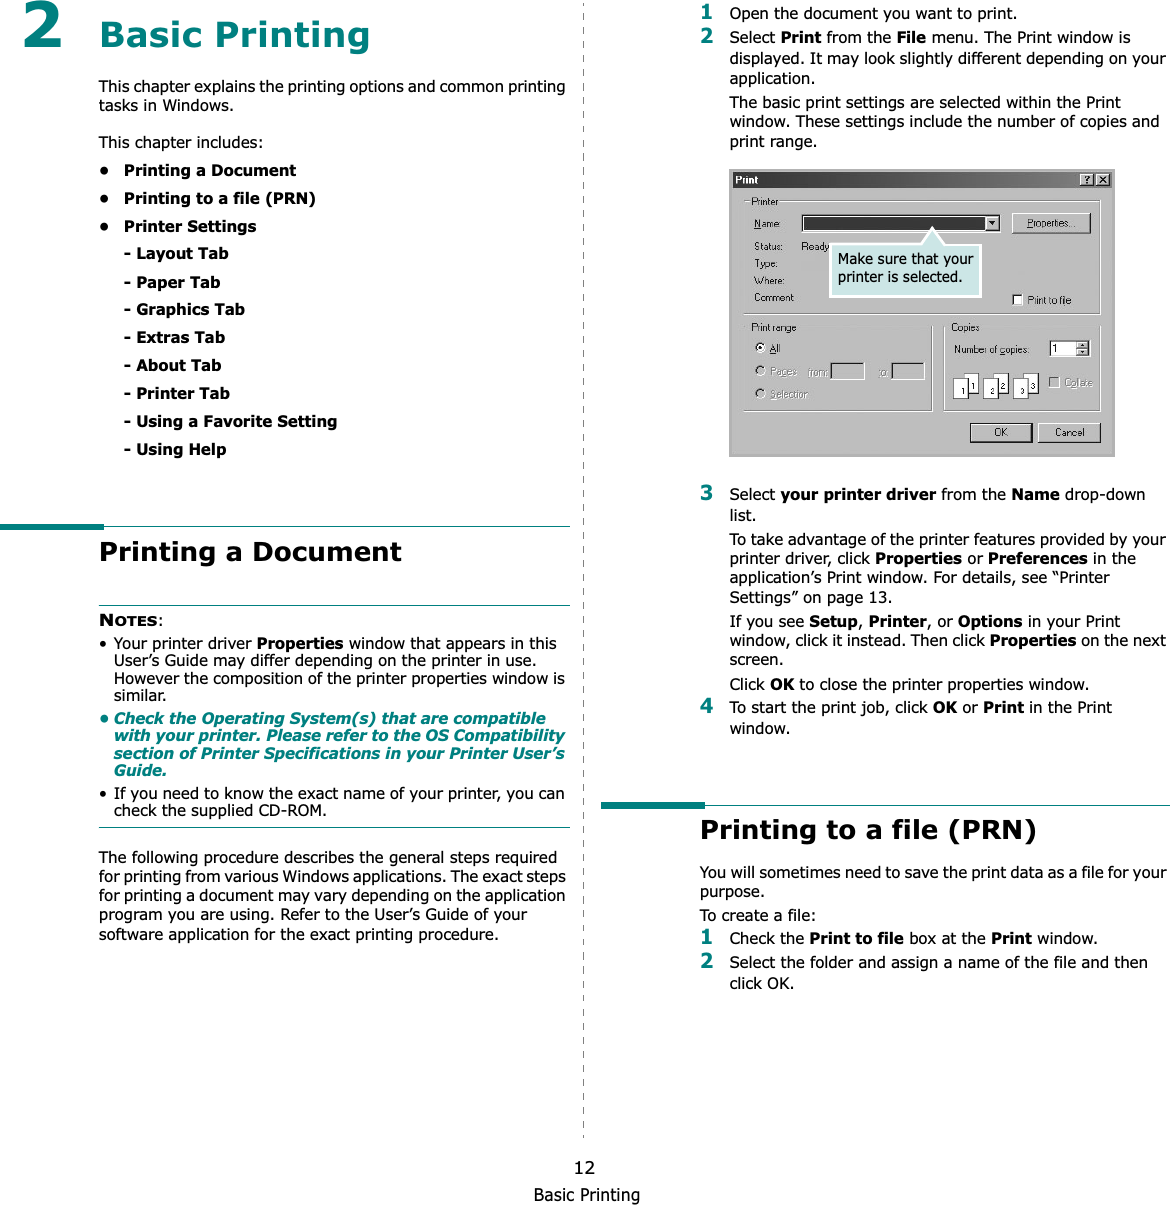 Basic Printing122Basic Printing This chapter explains the printing options and common printing tasks in Windows. This chapter includes:• Printing a Document• Printing to a file (PRN)• Printer Settings- Layout Tab- Paper Tab- Graphics Tab- Extras Tab- About Tab- Printer Tab- Using a Favorite Setting- Using HelpPrinting a DocumentNOTES:• Your printer driver Properties window that appears in this User’s Guide may differ depending on the printer in use. However the composition of the printer properties window is similar.• Check the Operating System(s) that are compatible with your printer. Please refer to the OS Compatibility section of Printer Specifications in your Printer User’s Guide.• If you need to know the exact name of your printer, you can check the supplied CD-ROM.The following procedure describes the general steps required for printing from various Windows applications. The exact steps for printing a document may vary depending on the application program you are using. Refer to the User’s Guide of your software application for the exact printing procedure.1Open the document you want to print.2Select Print from the File menu. The Print window is displayed. It may look slightly different depending on your application. The basic print settings are selected within the Print window. These settings include the number of copies and print range.3Select your printer driver from the Name drop-down list.To take advantage of the printer features provided by your printer driver, click Properties or Preferences in the application’s Print window. For details, see “Printer Settings” on page 13.If you see Setup,Printer, or Options in your Print window, click it instead. Then click Properties on the next screen.Click OK to close the printer properties window.4To start the print job, click OK or Print in the Print window.Printing to a file (PRN)  You will sometimes need to save the print data as a file for your purpose. To create a file:1Check the Print to file box at the Print window.2Select the folder and assign a name of the file and then click OK.Make sure that your printer is selected.